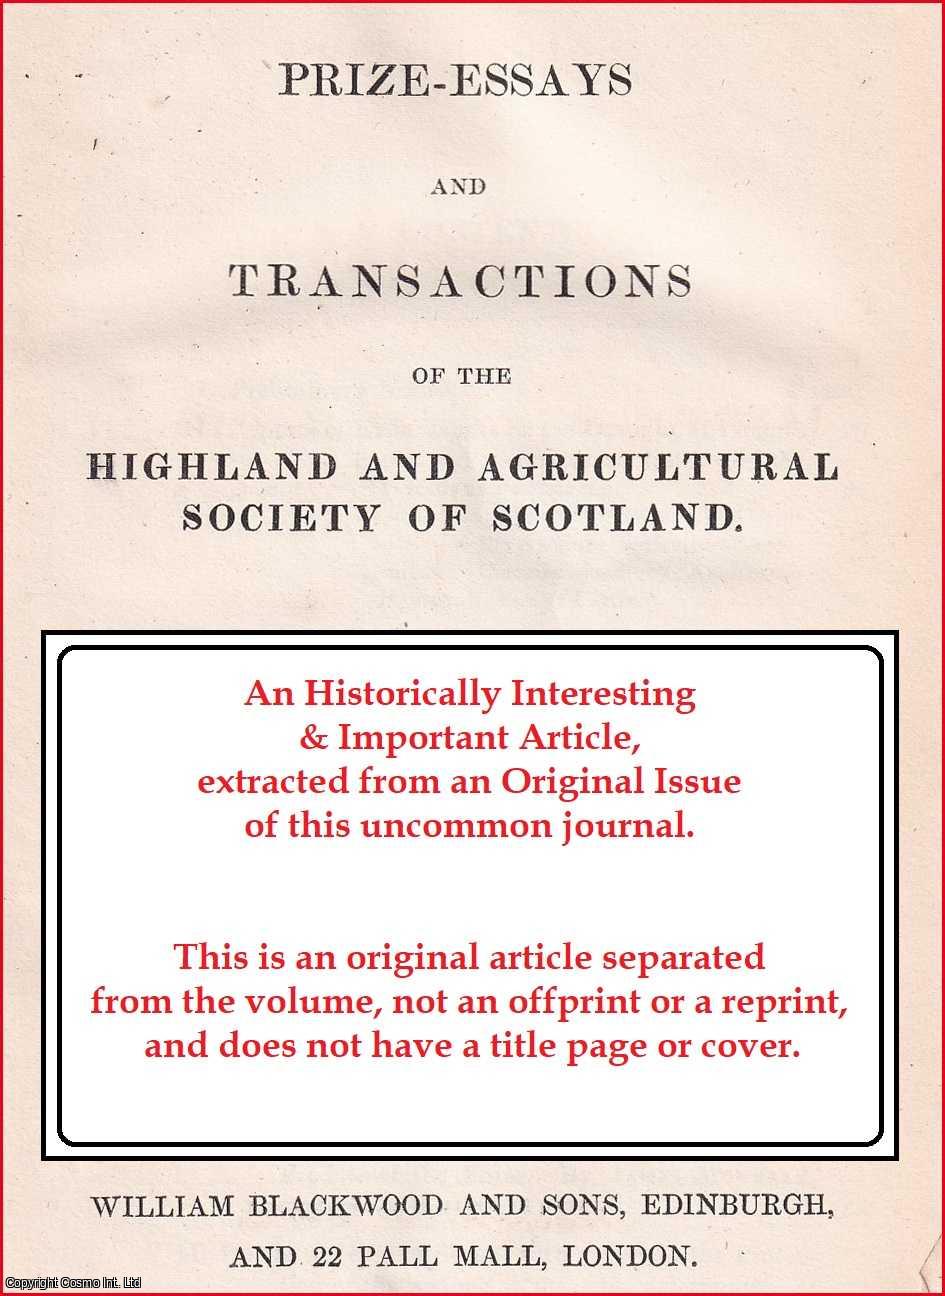 Honourable Captain W. Ogilvy, Airlie Castle. - The Value of Bone-Manure, in Comparison with Ordinary Farm-Yard Manure. An uncommon original article from the Prize Essays and Transactions of the Highland Society of Scotland, 1835.